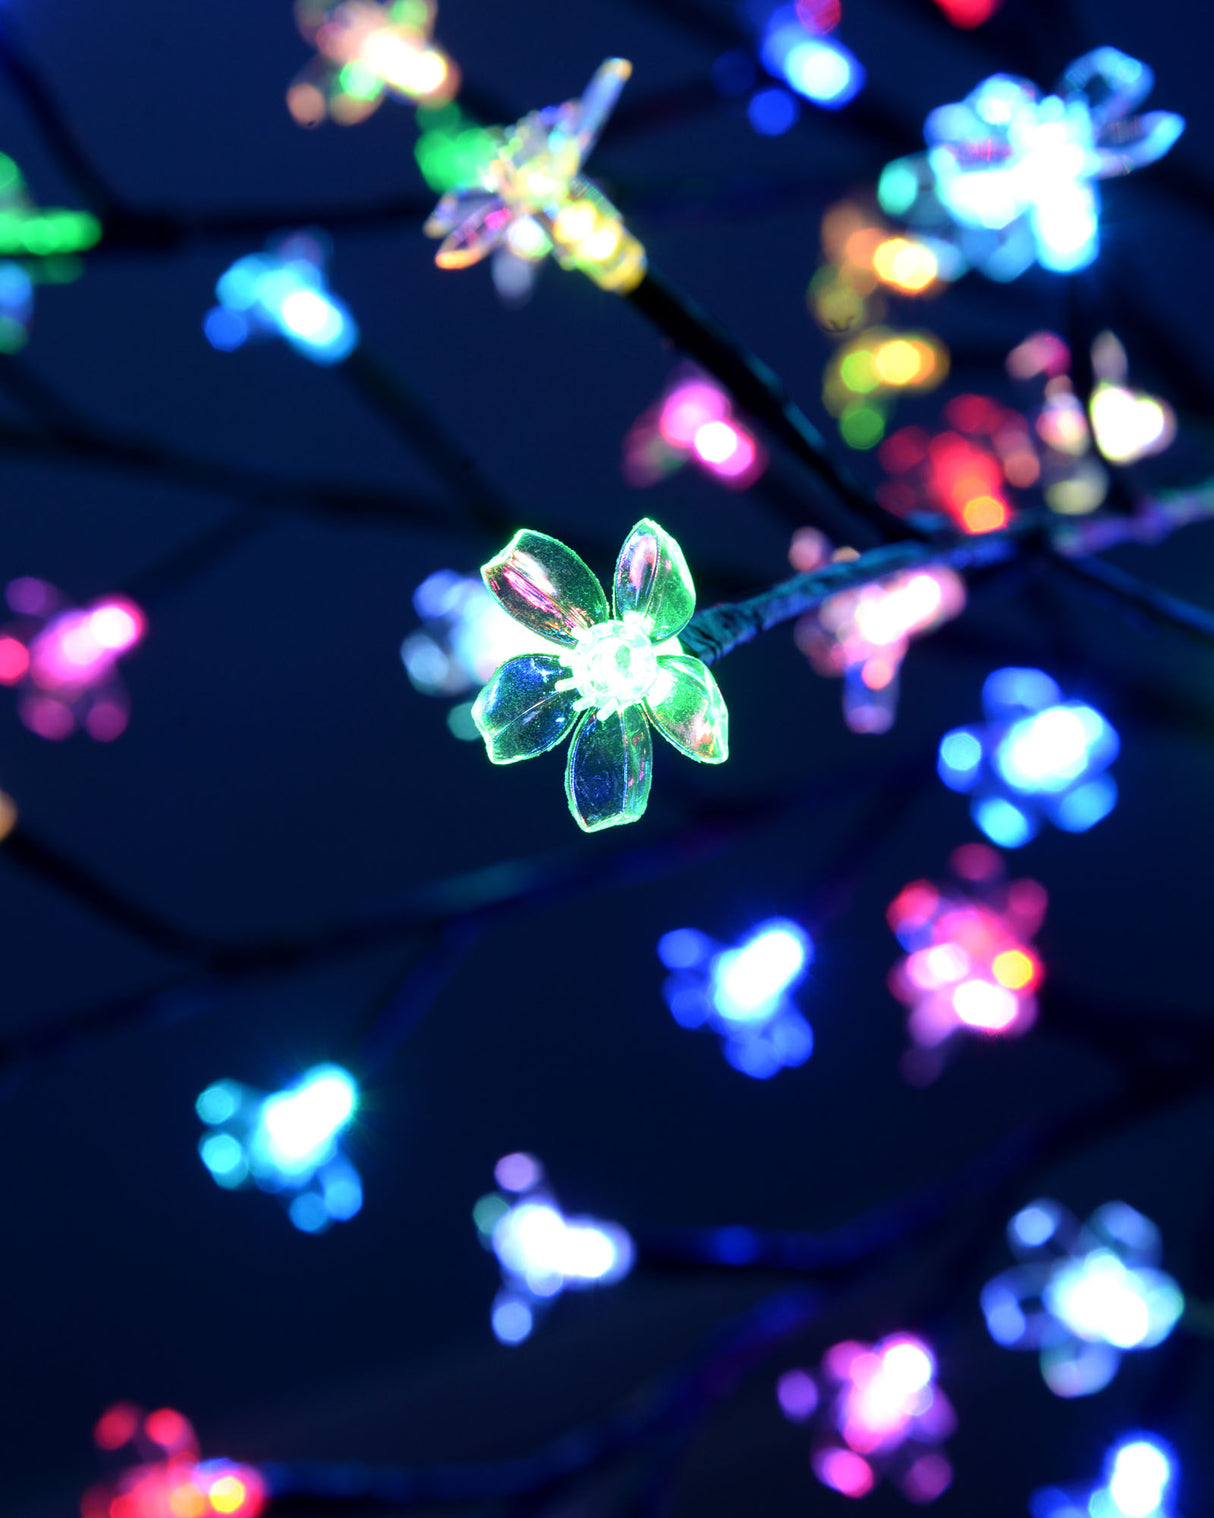 Pre-Lit Illuminated Cherry Blossom Twig Tree with 200 LEDs, Colour Changing, 5 ft/1.5 m